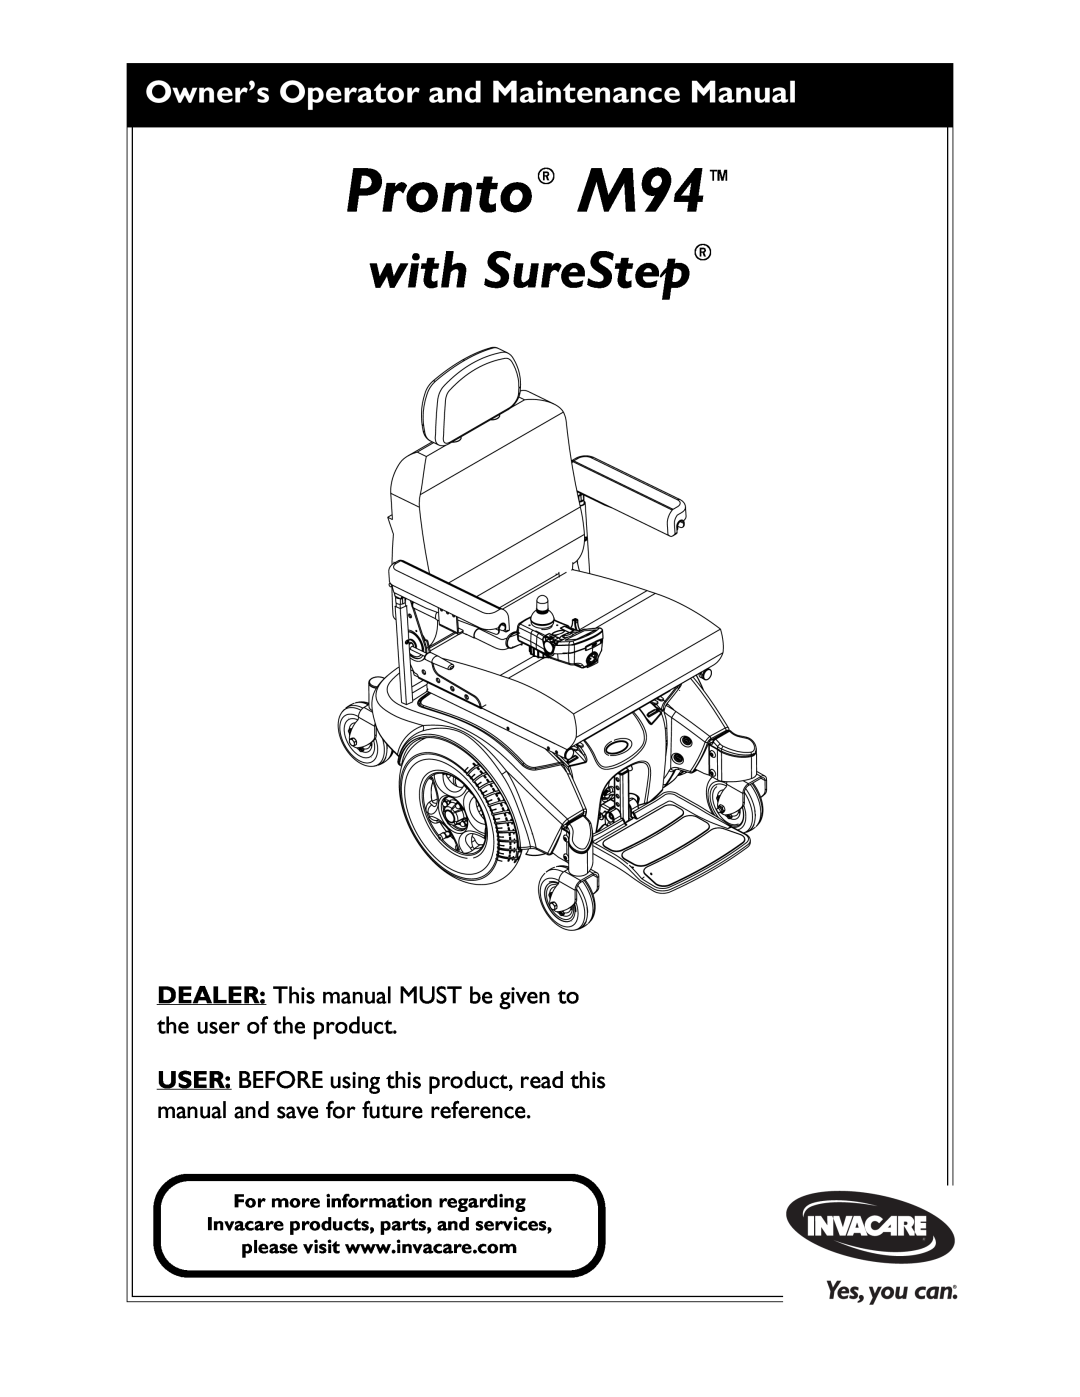 Invacare Pronto M71 manual Pronto M94, with SureStep, Owner’s Operator and Maintenance Manual 